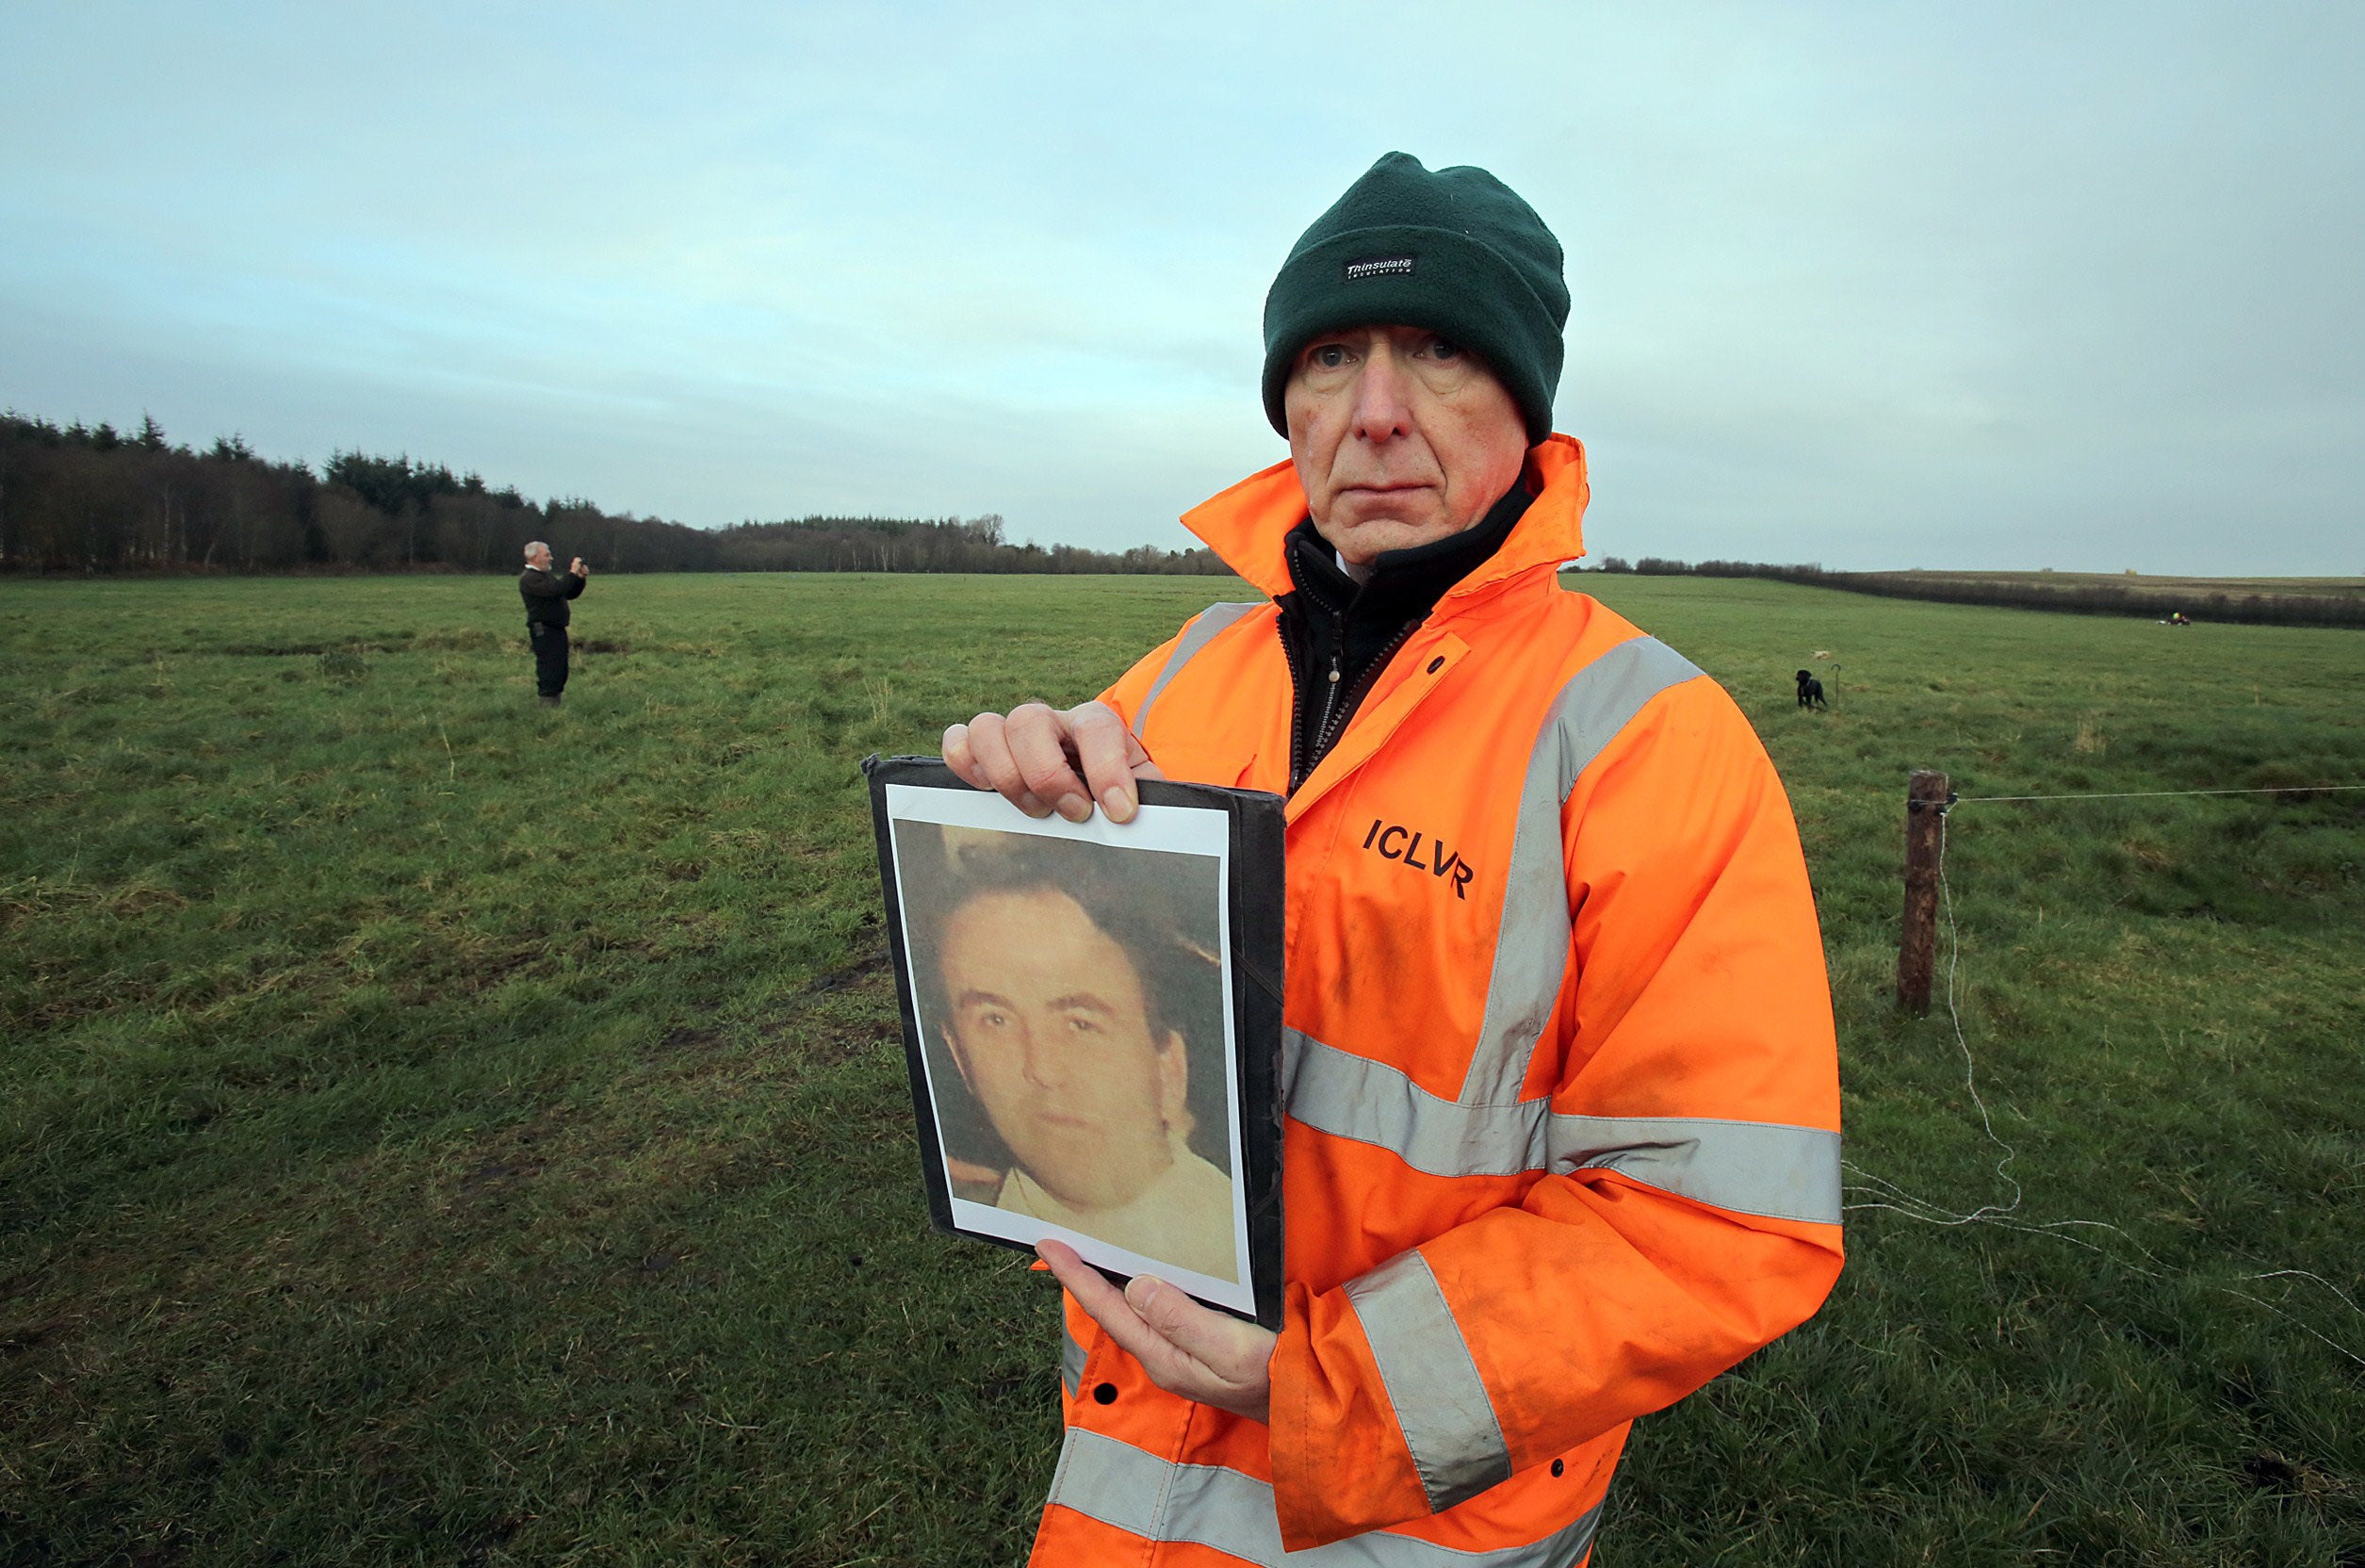 Pictured in December 2014, Geoff Knupfer, the lead forensic scientist and investigator for the Independent Commission for the Location of Victims Remains (ICLVR), holds a picture of Joe Lynskey at the site where his remains are believed to have been found